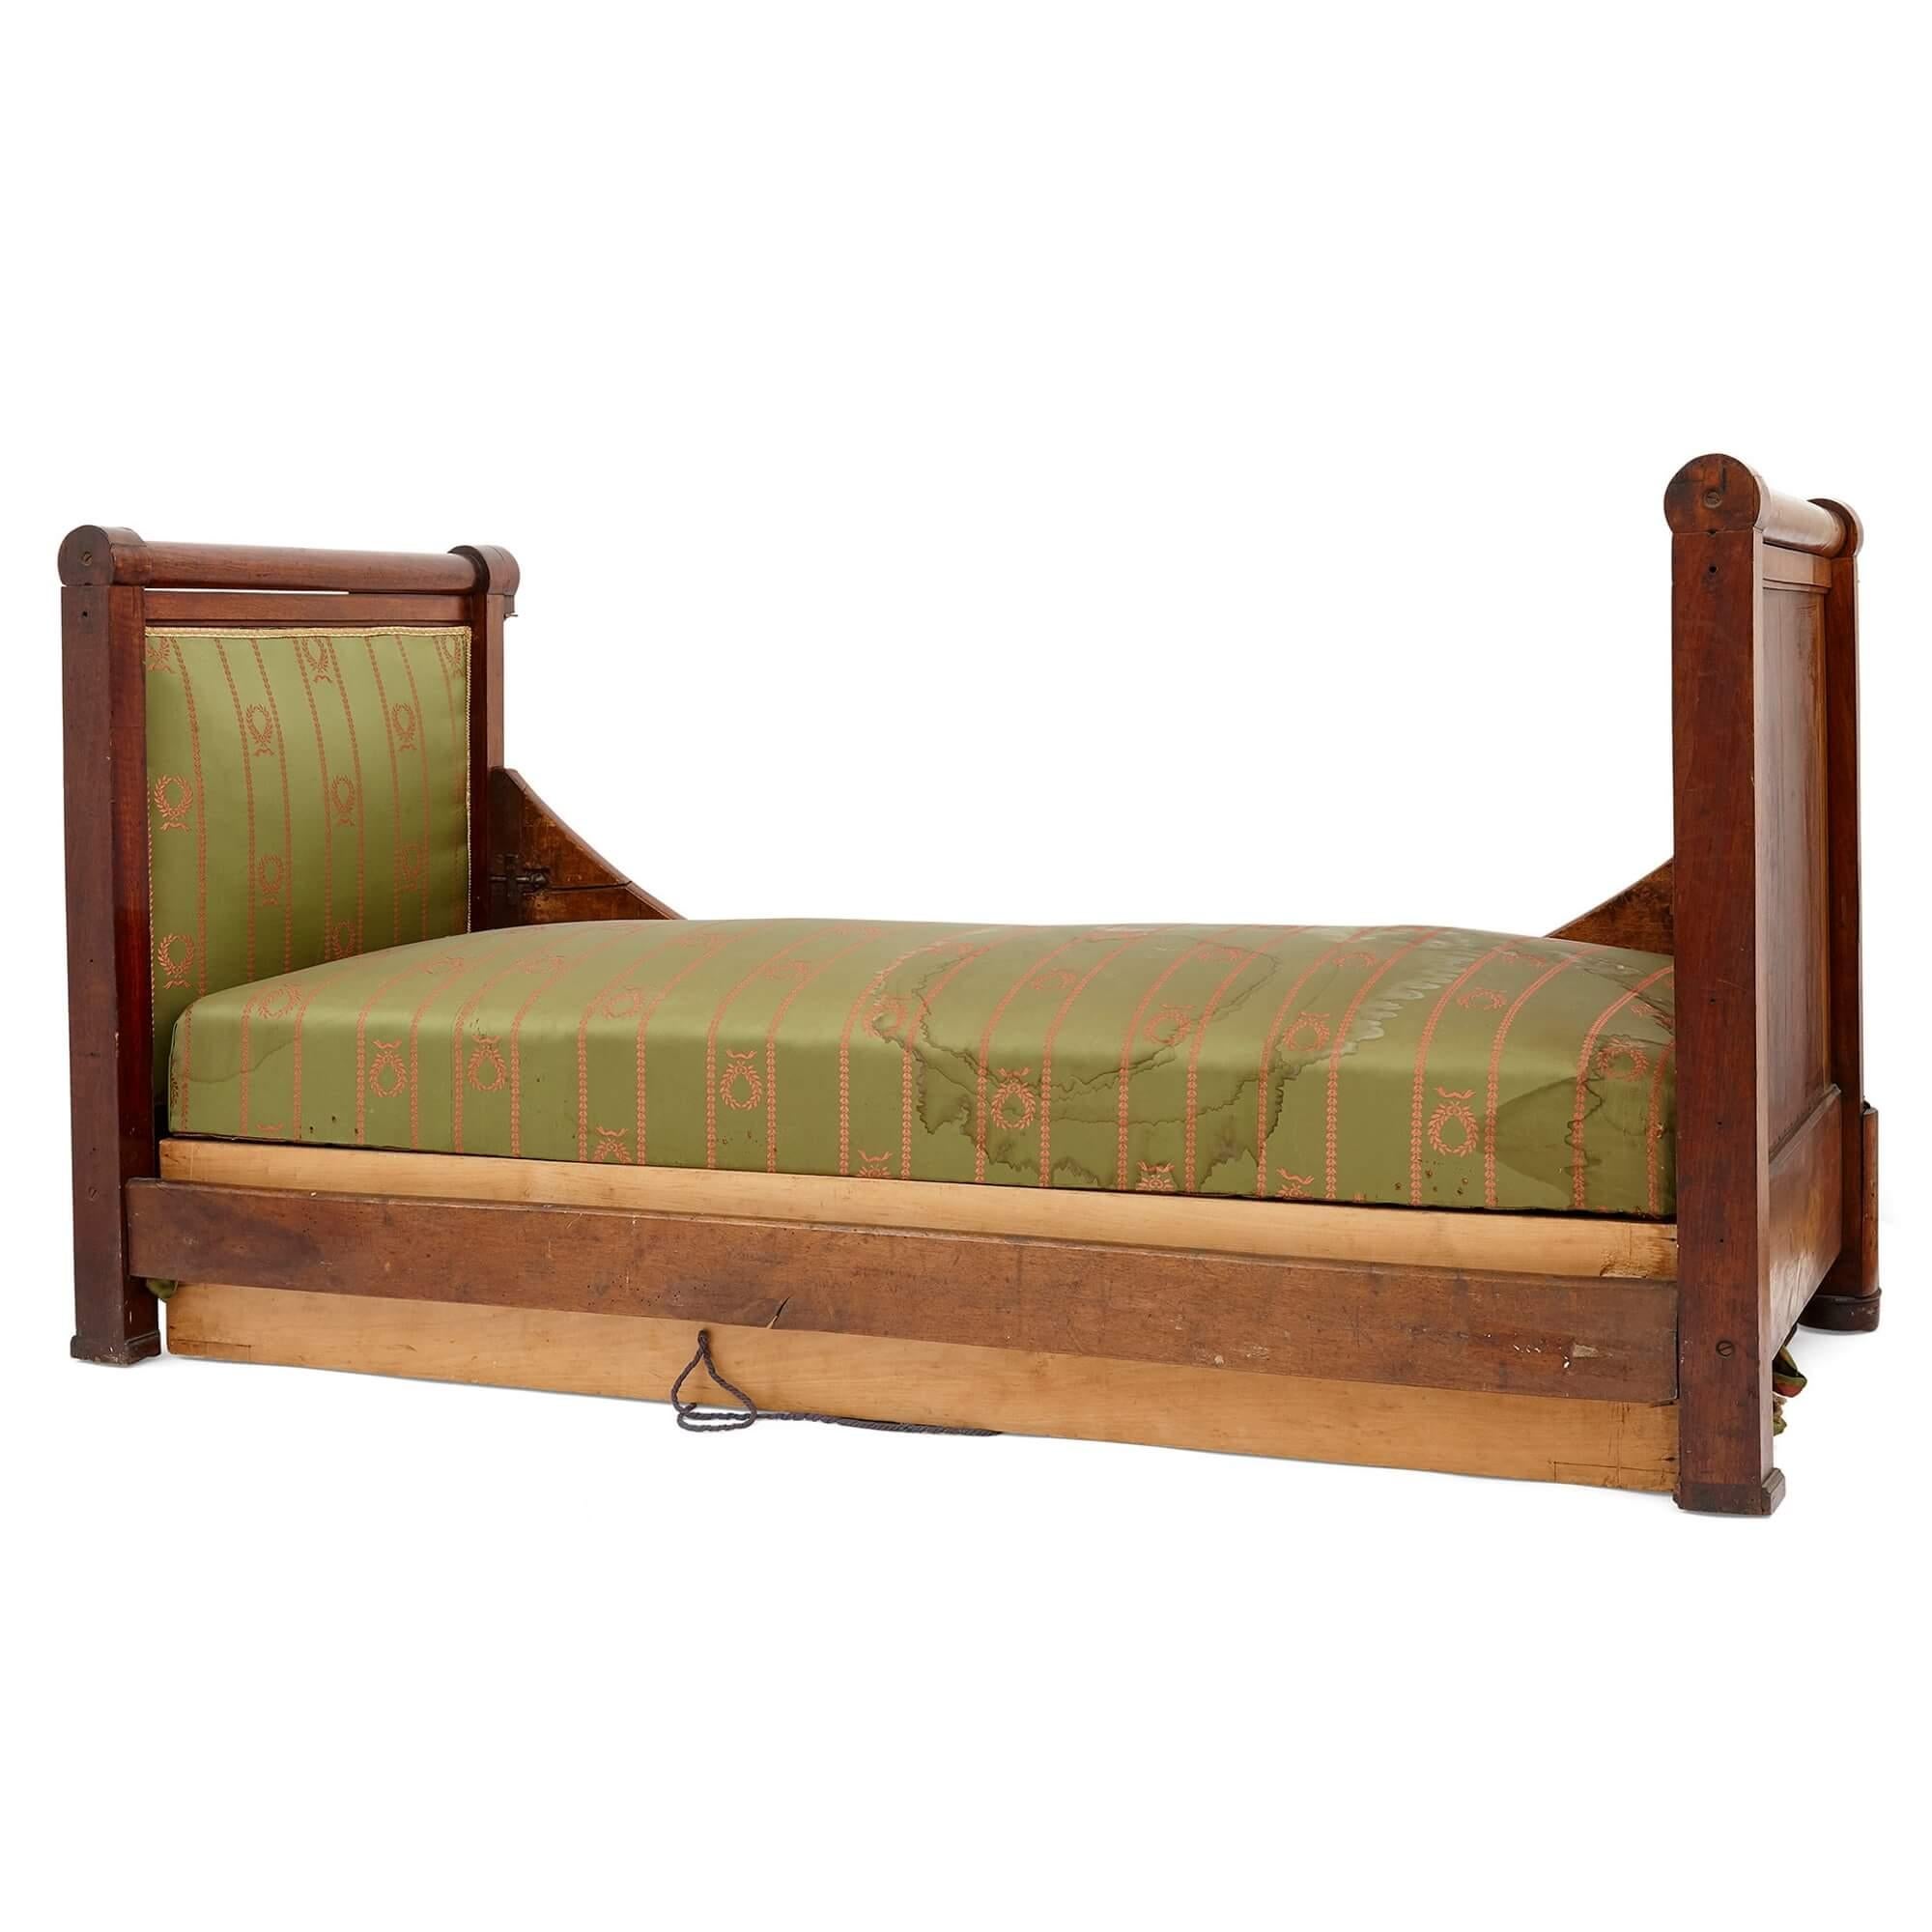 19th Century French Restauration Period Mahogany and Gilt Bronze Daybed For Sale